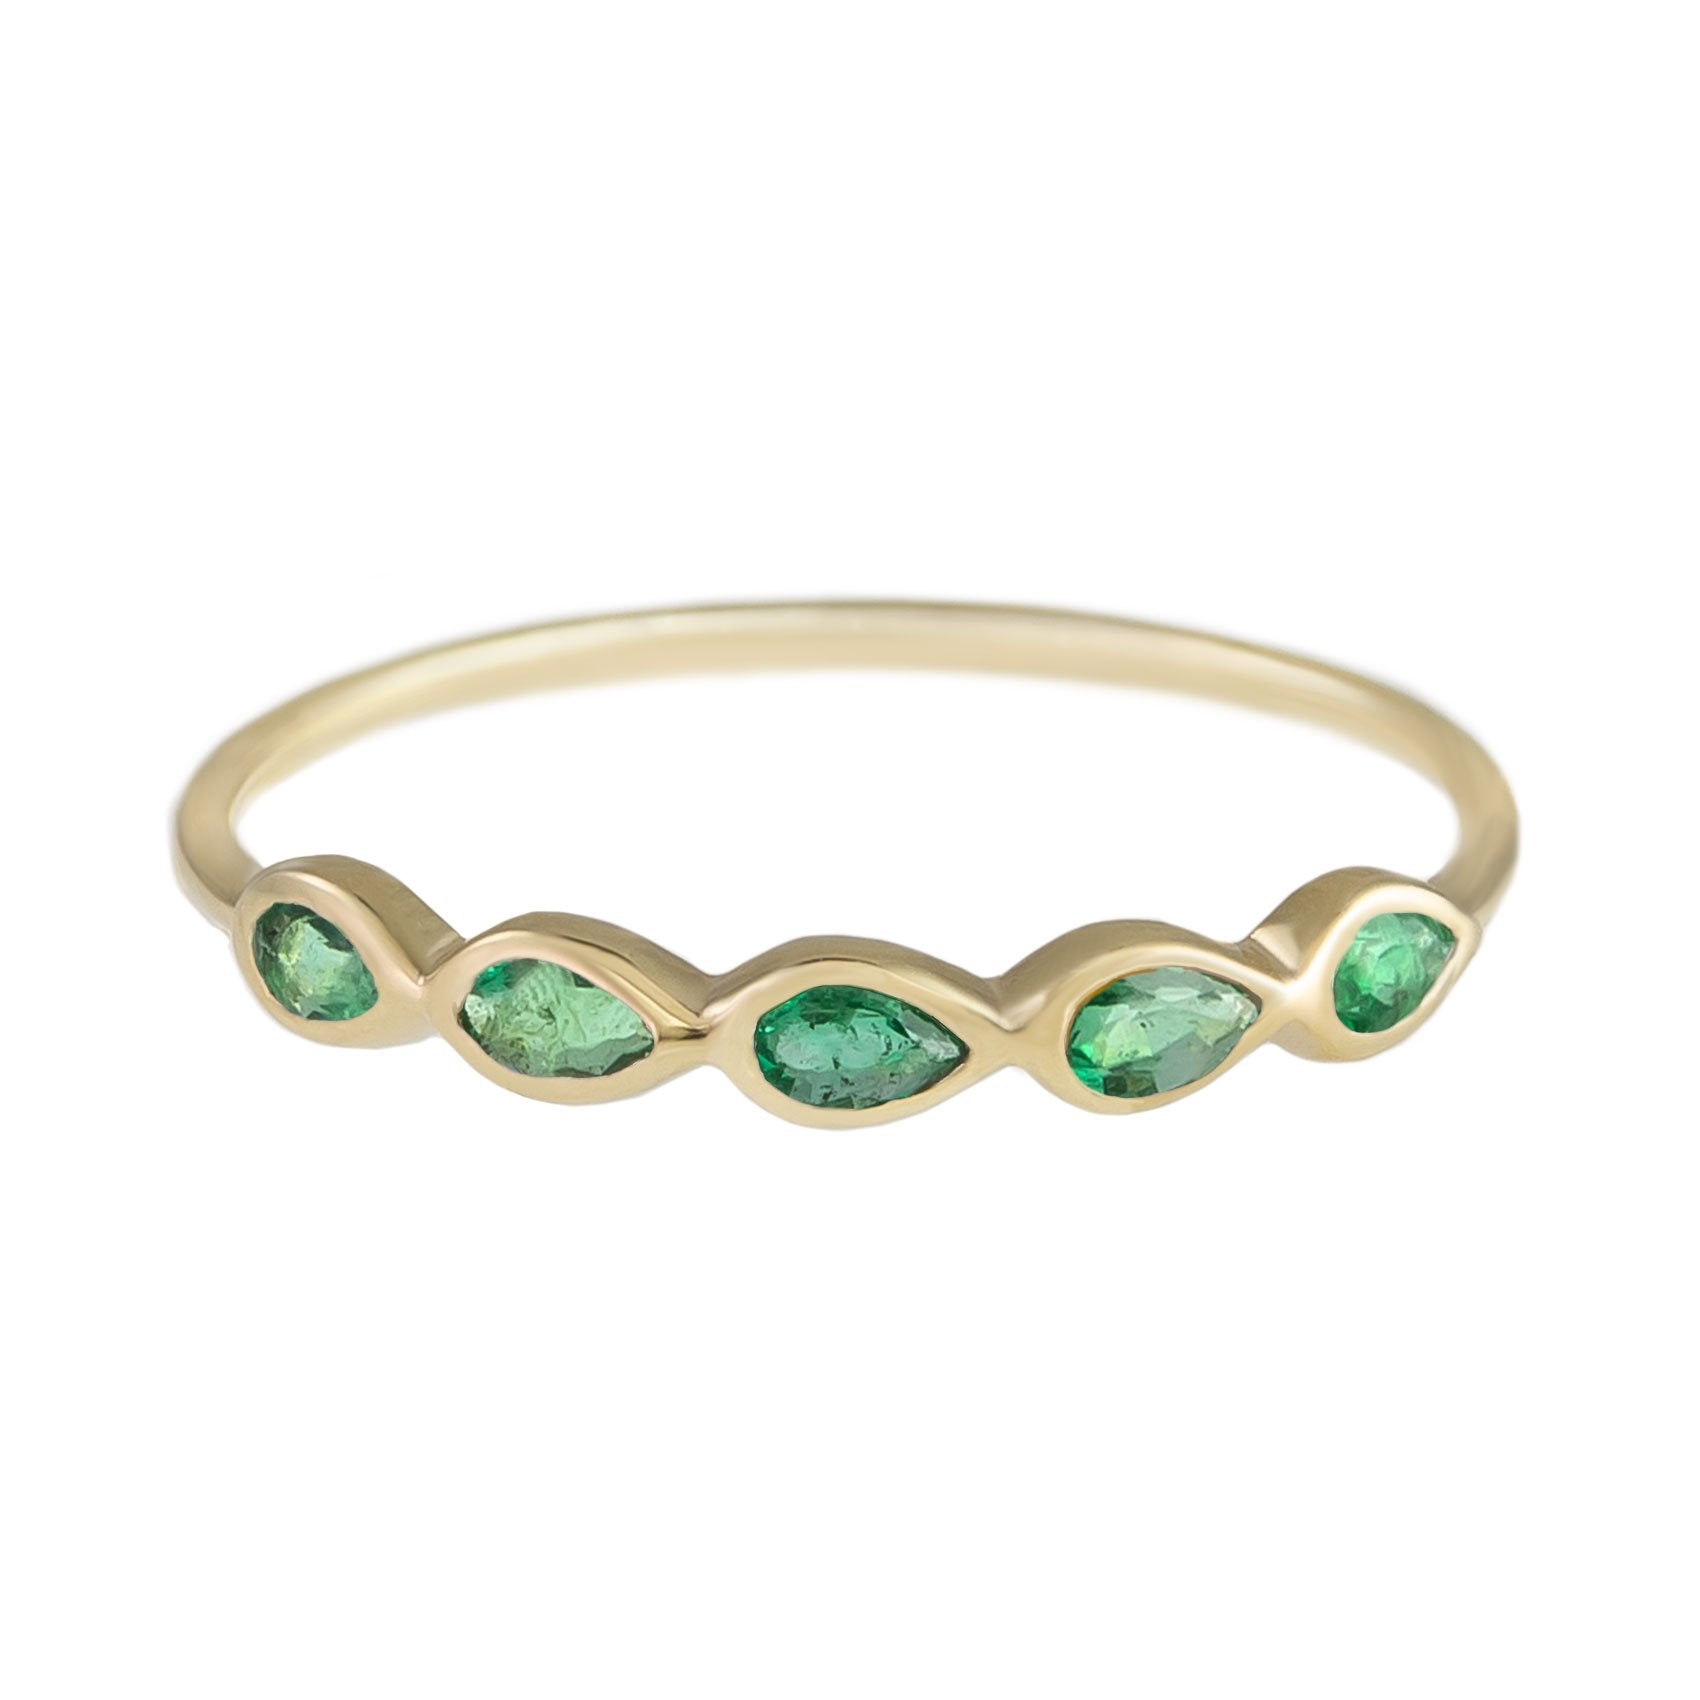 Métier by tomfoolery 5 Stone Emerald Ring 9ct Yellow Gold with Pear Cut Emeralds